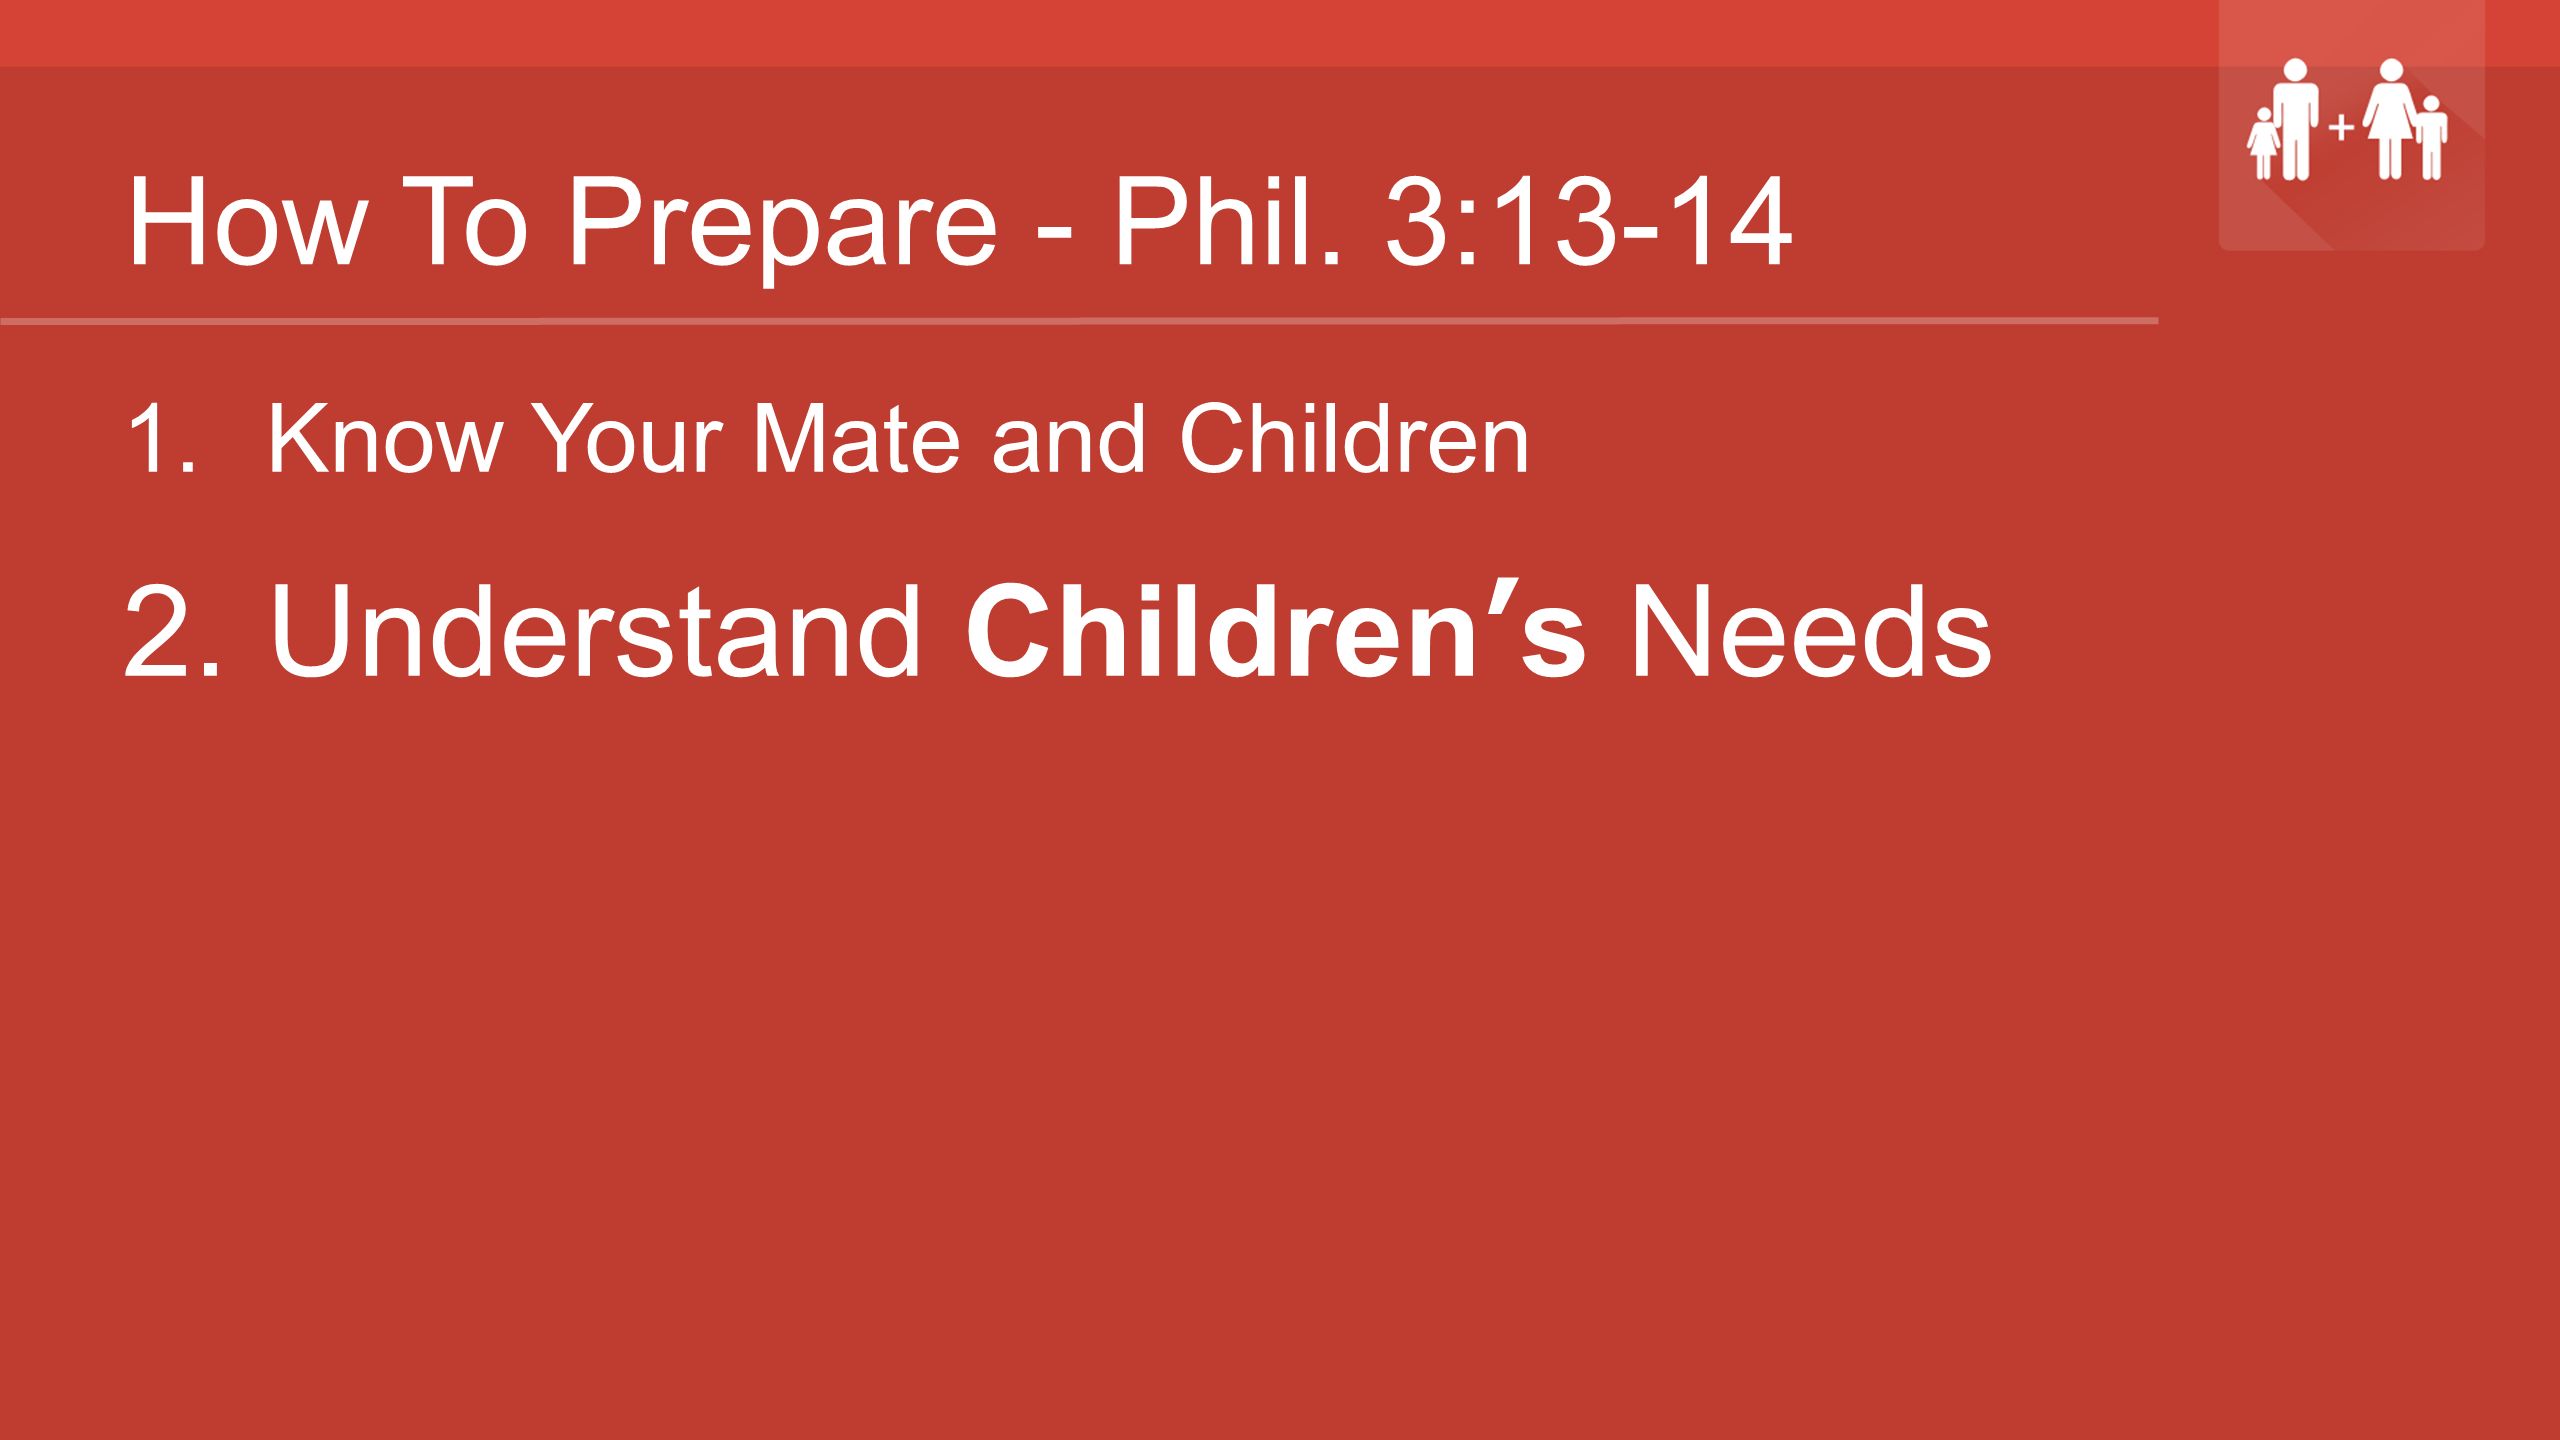 How To Prepare - Phil. 3: Know Your Mate and Children 2. Understand Children’s Needs